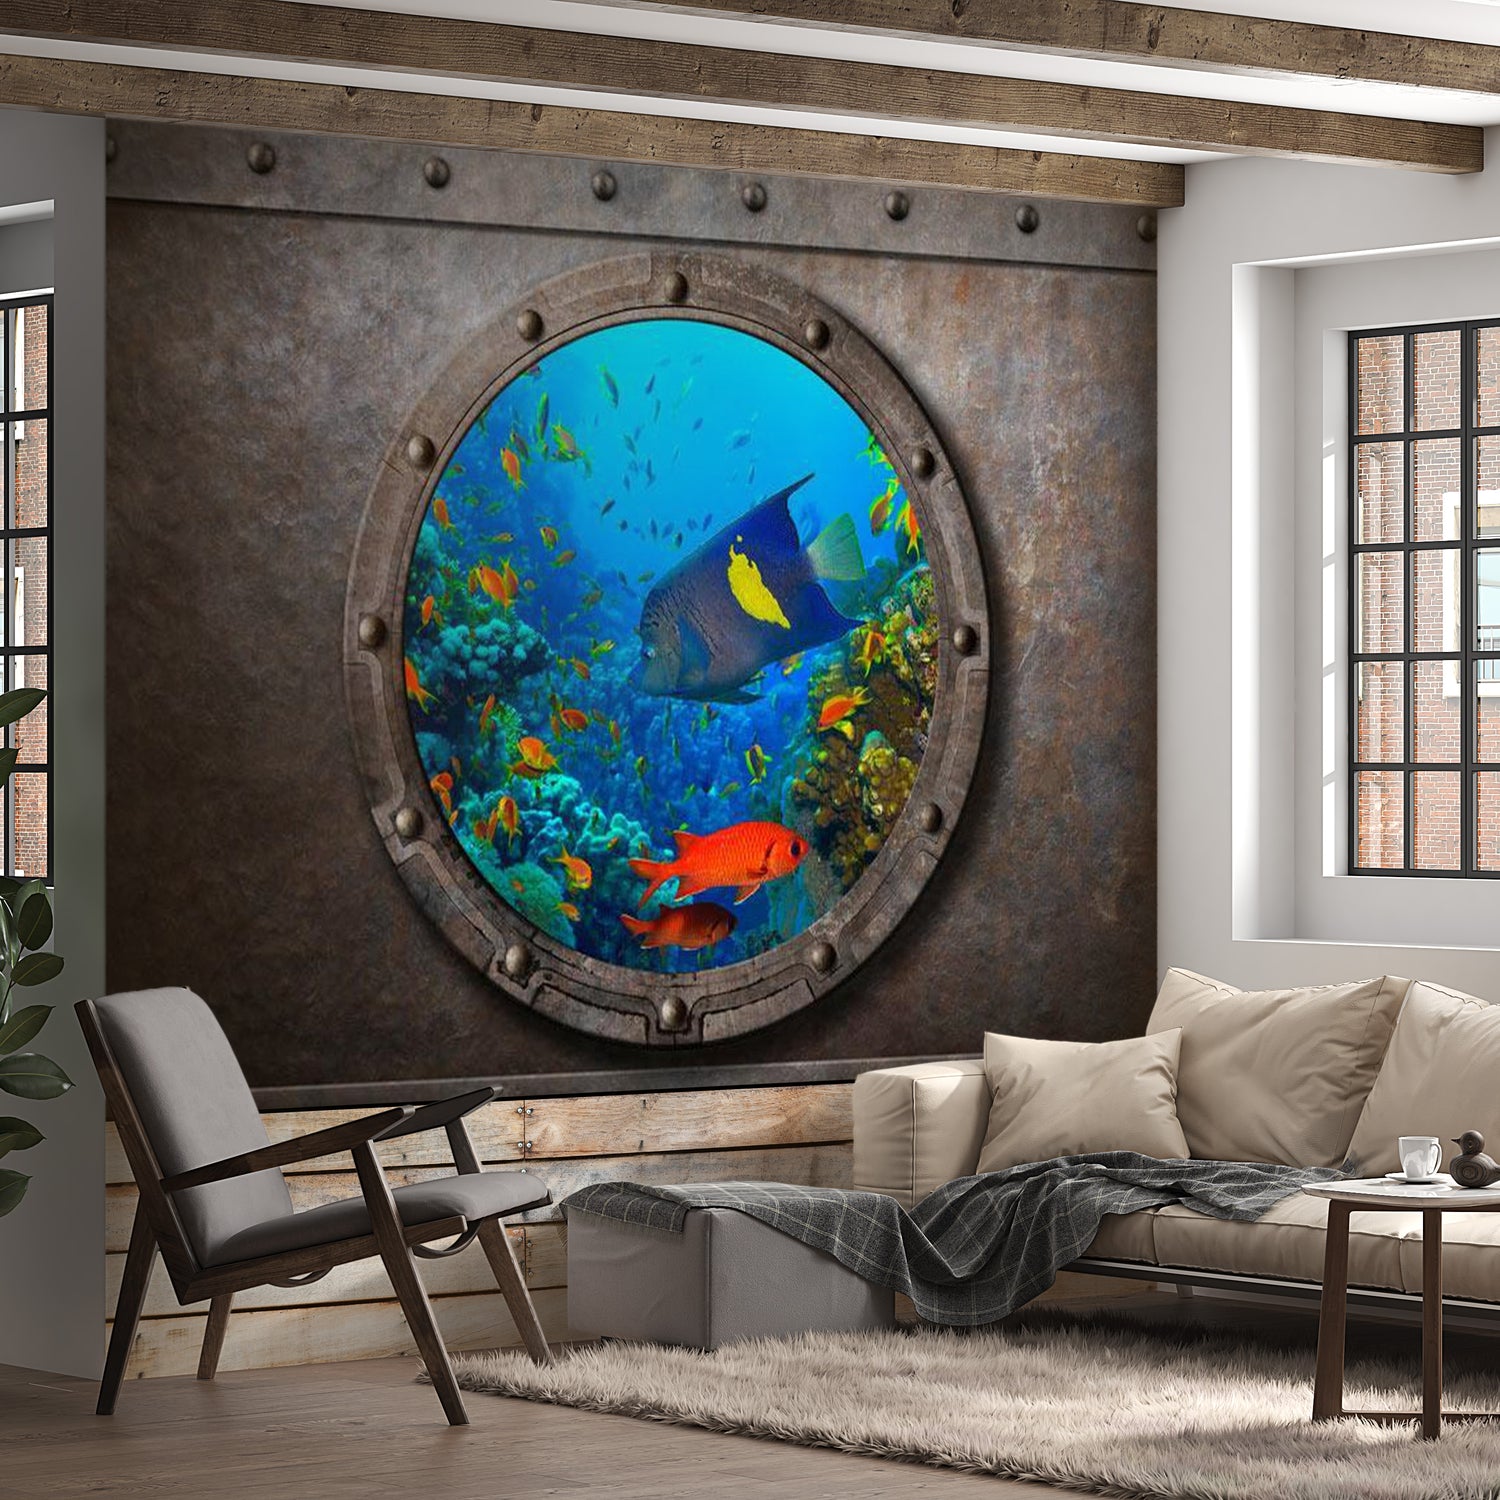 Peel & Stick Animal Wall Mural - Submarine Window - Removable Wall Decals